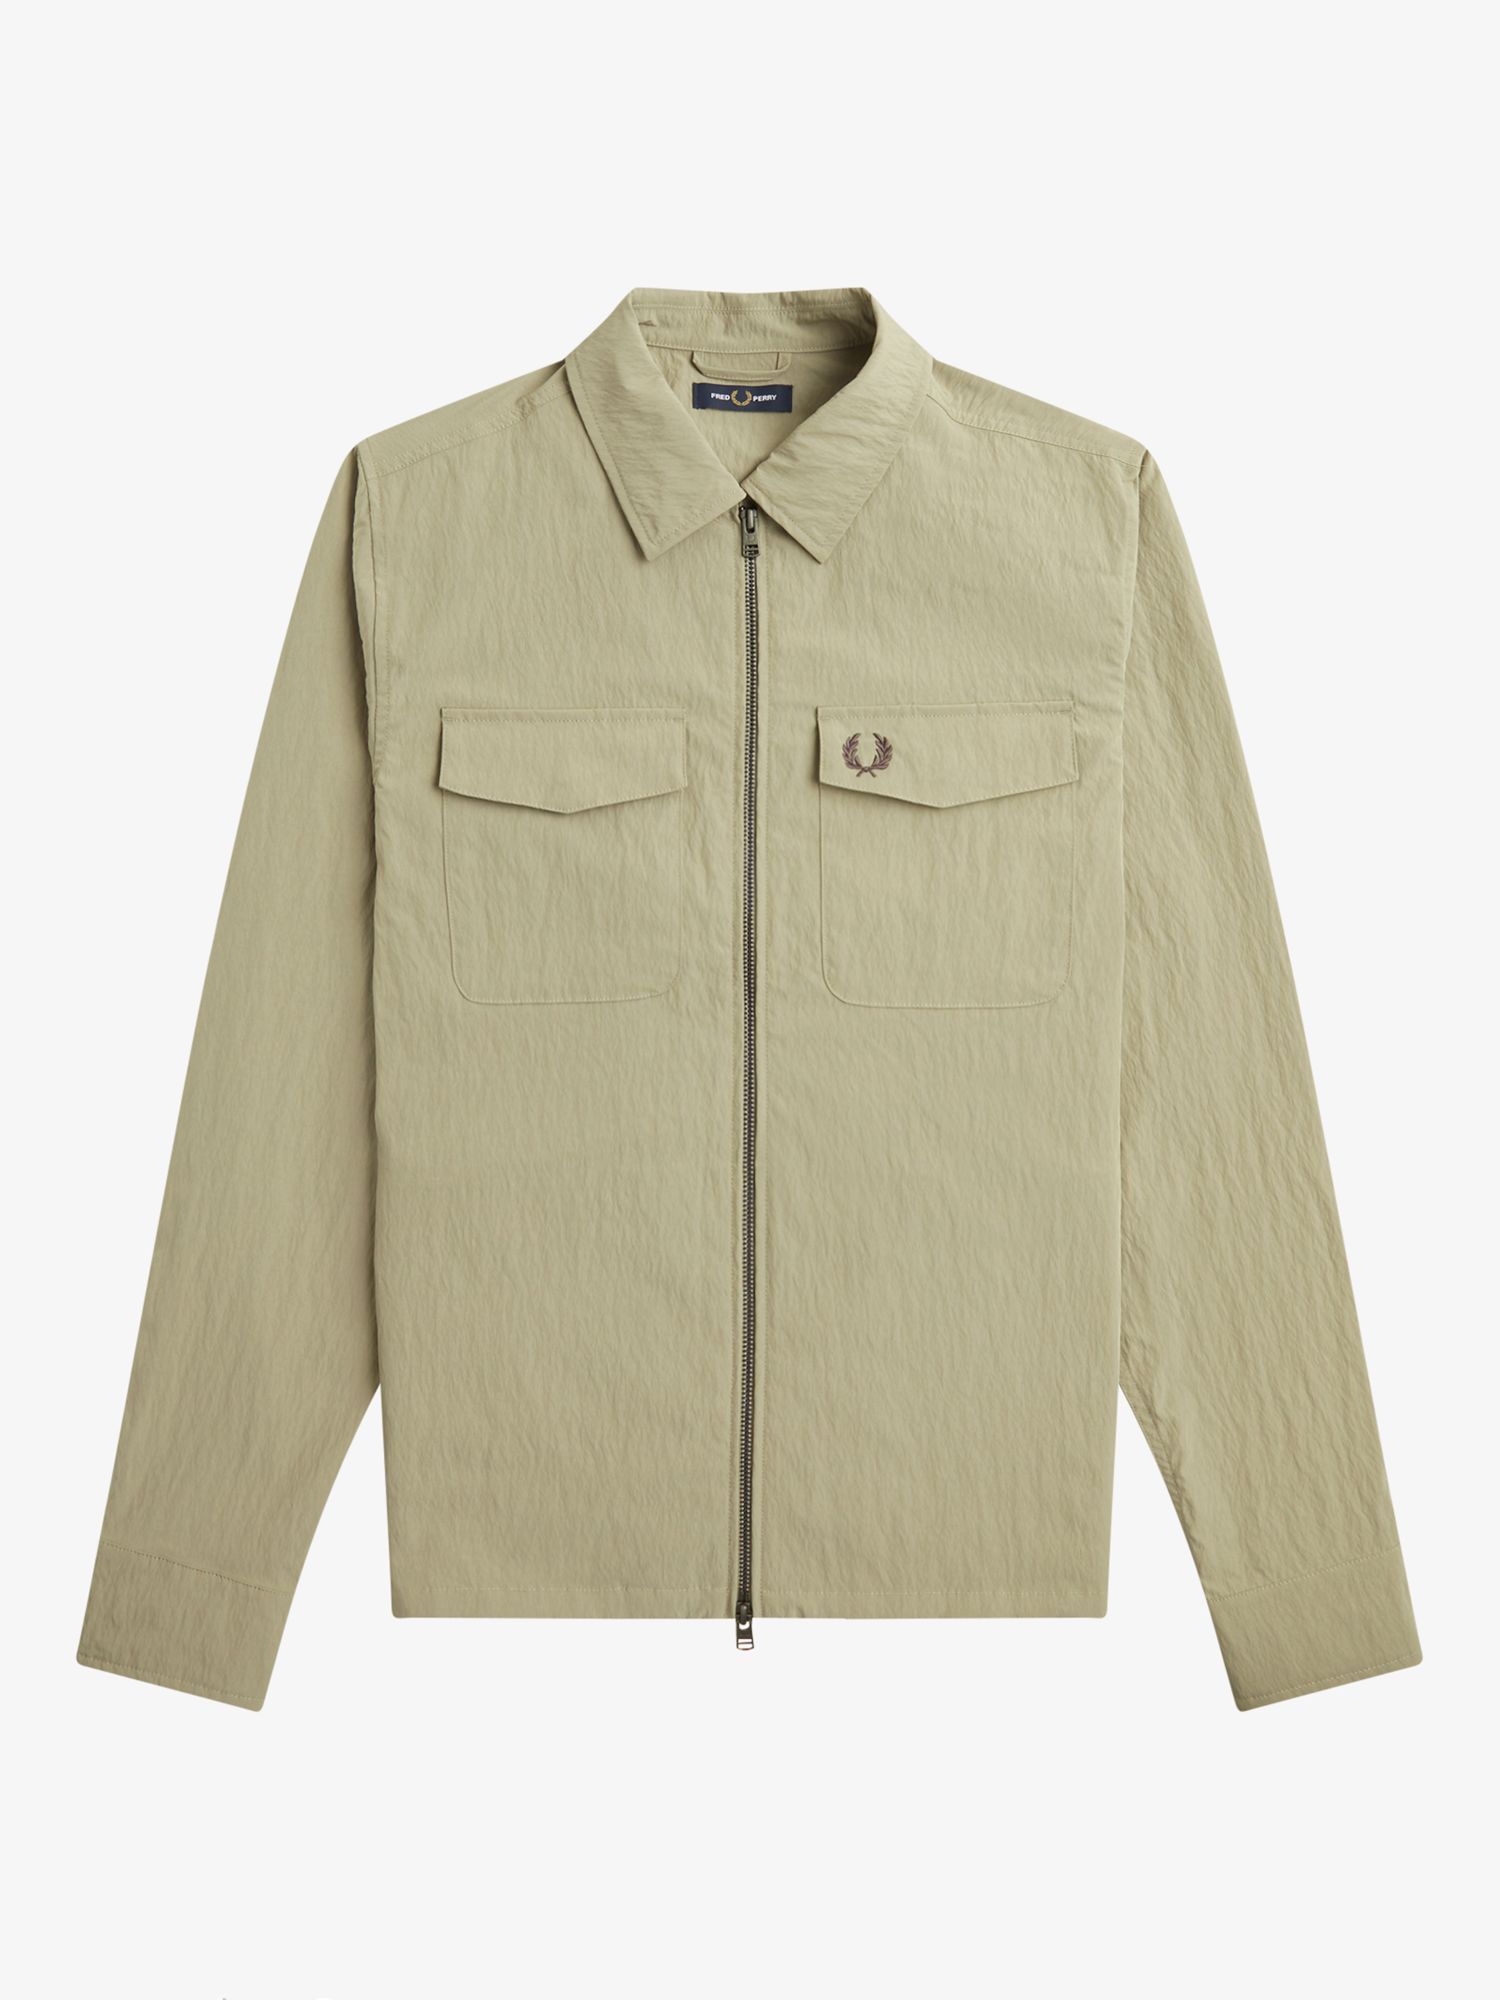 Fred Perry Zip Overshirt, Warm Grey, S